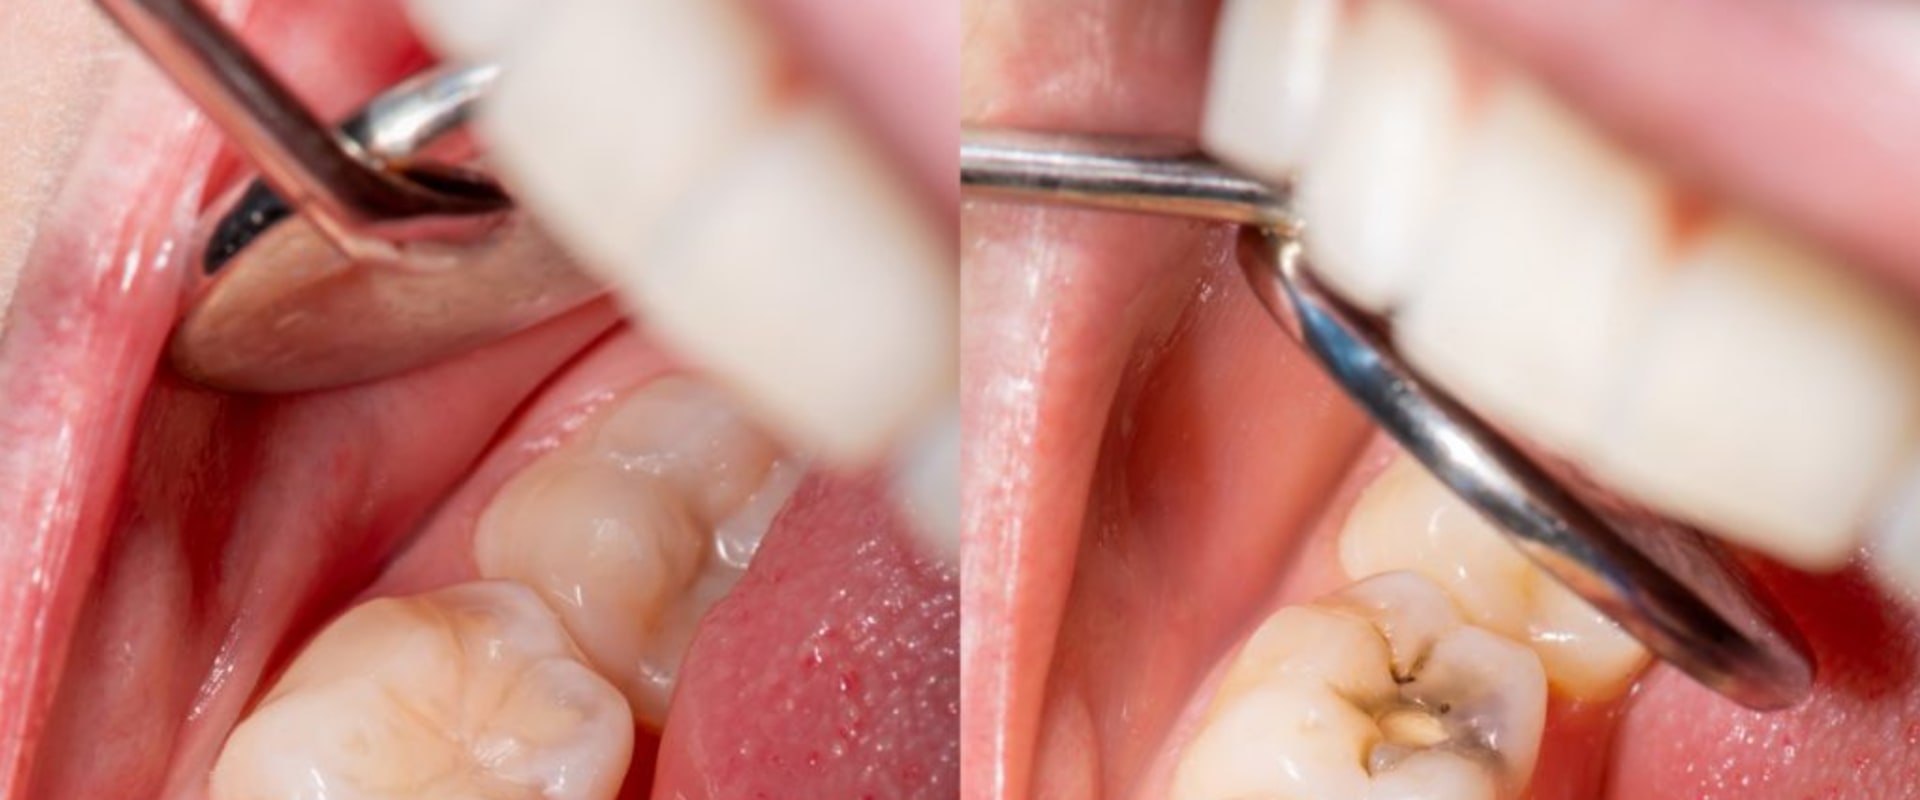 Care for Fillings: Everything You Need to Know